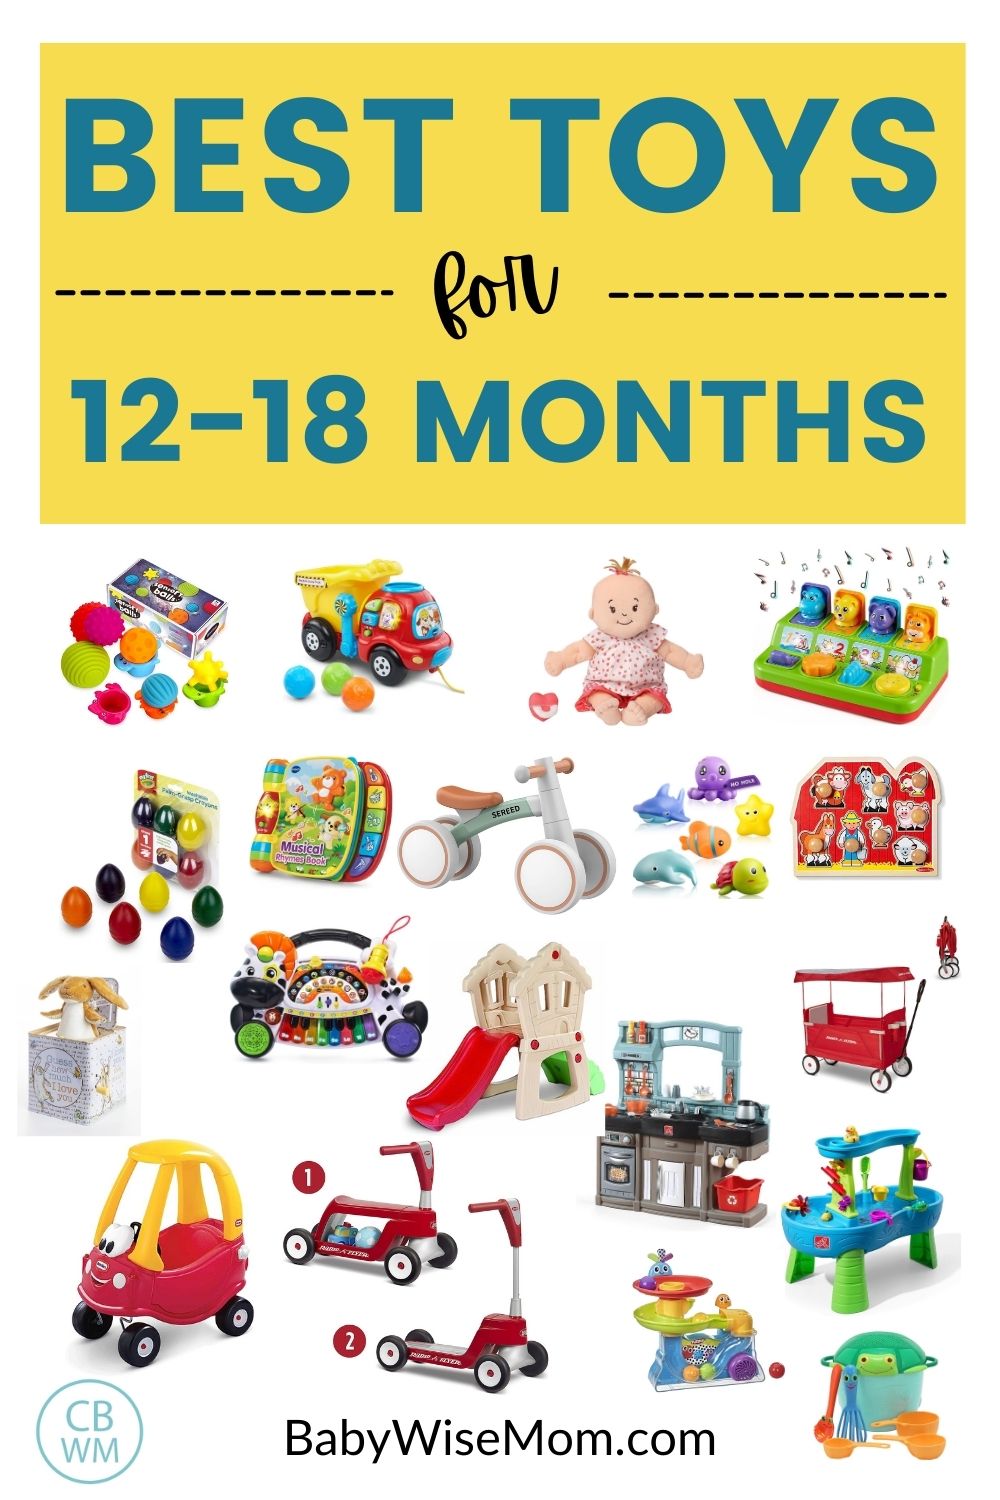 18 months old toys, SAVE 43% 